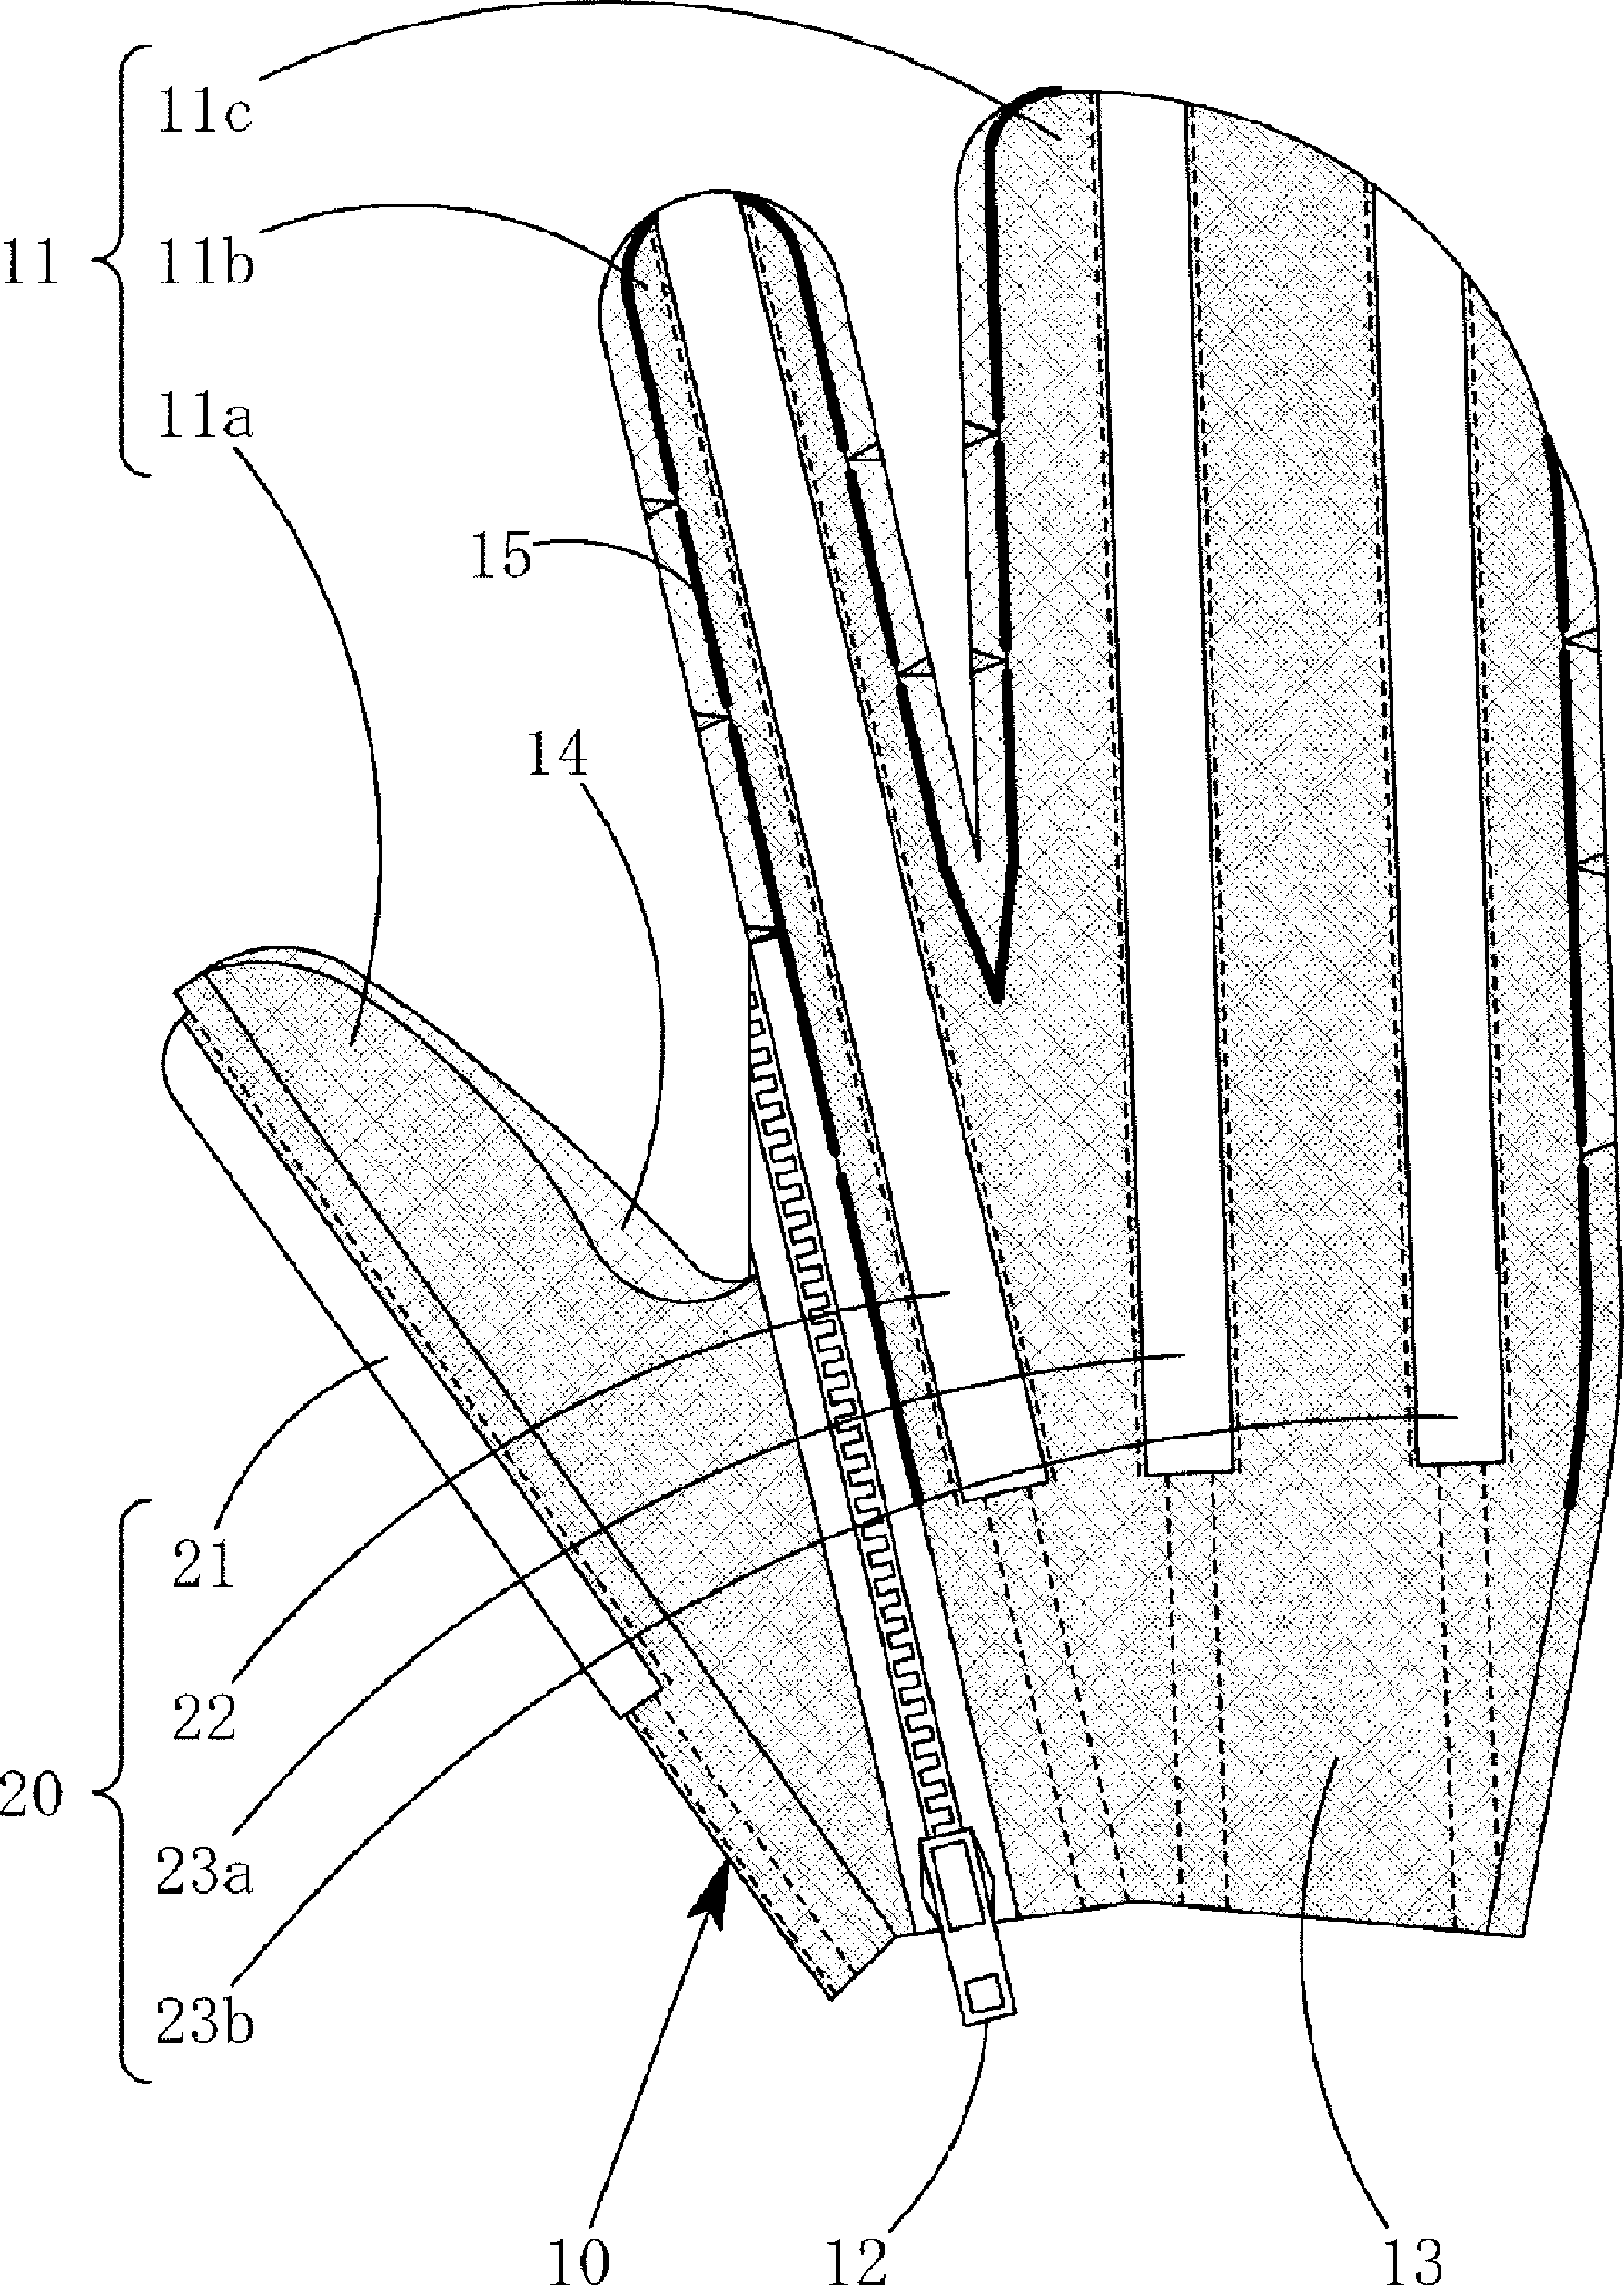 Glove-type power assist device